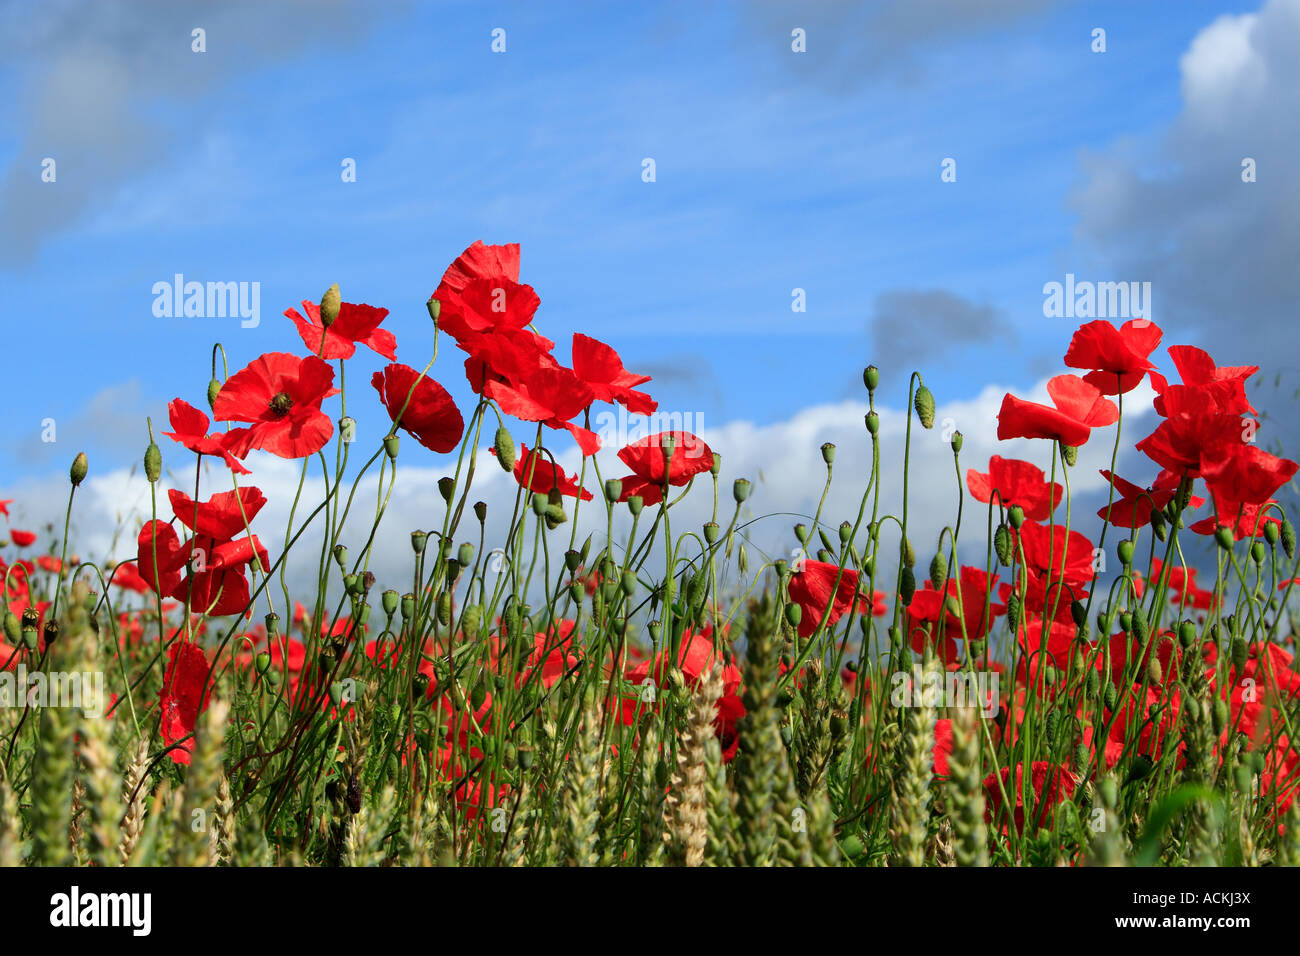 The Corn Poppy Field Poppy Flanders Poppy or Red Poppy is the wild poppy of agricultural cultivation Papaver rhoeas It is a vari Stock Photo